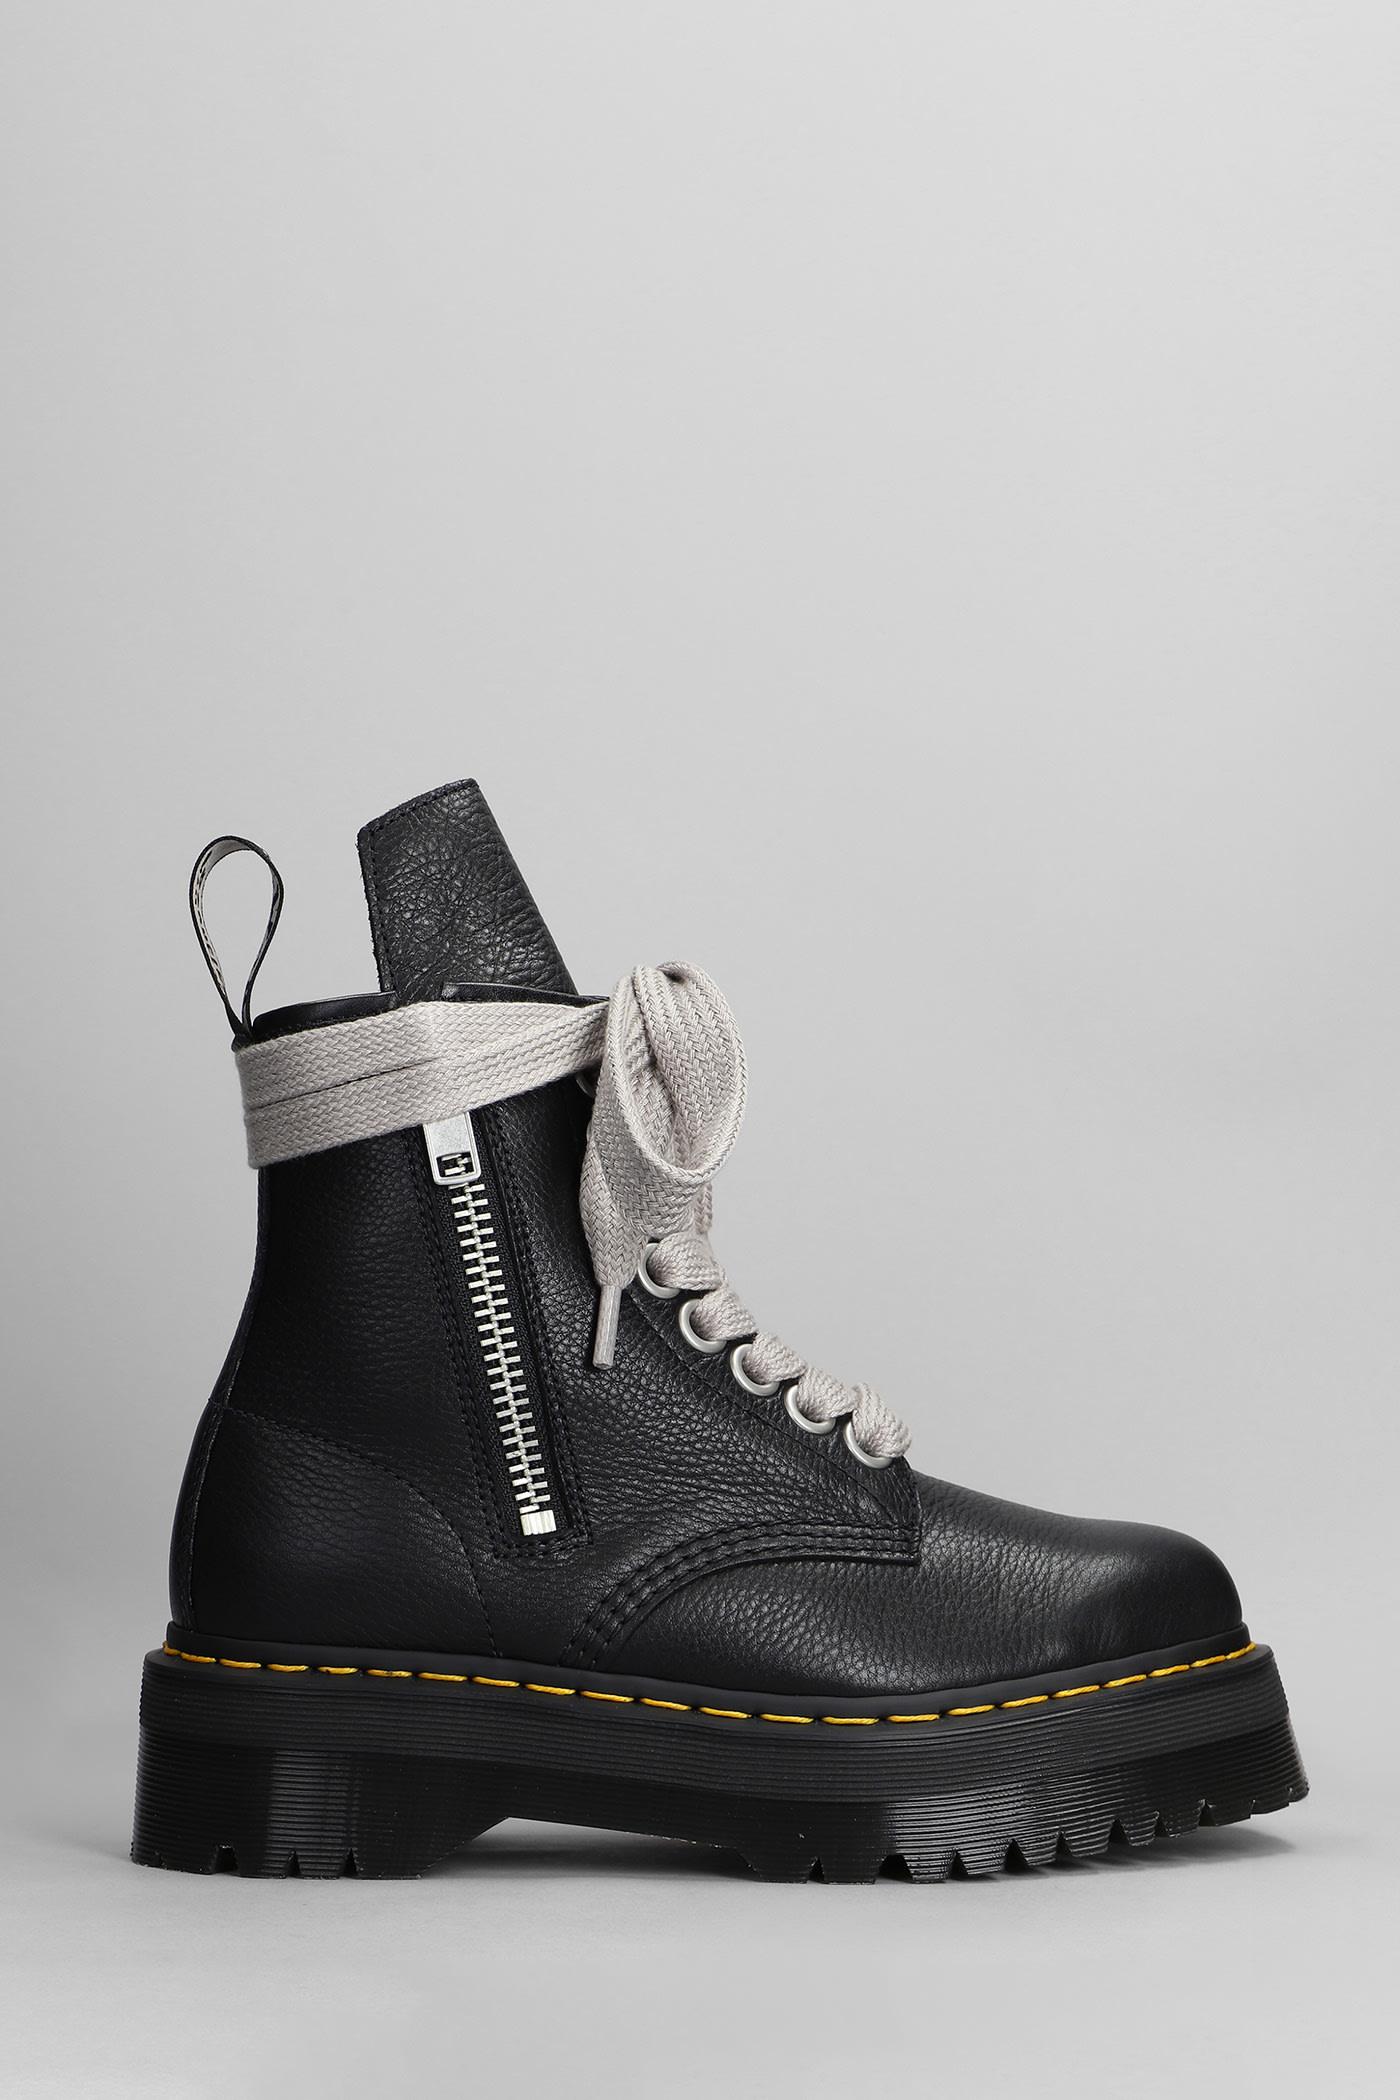 Rick Owens X Dr. Martens 1460 Quad Ro Combat Boots In Black Leather for Men  | Lyst